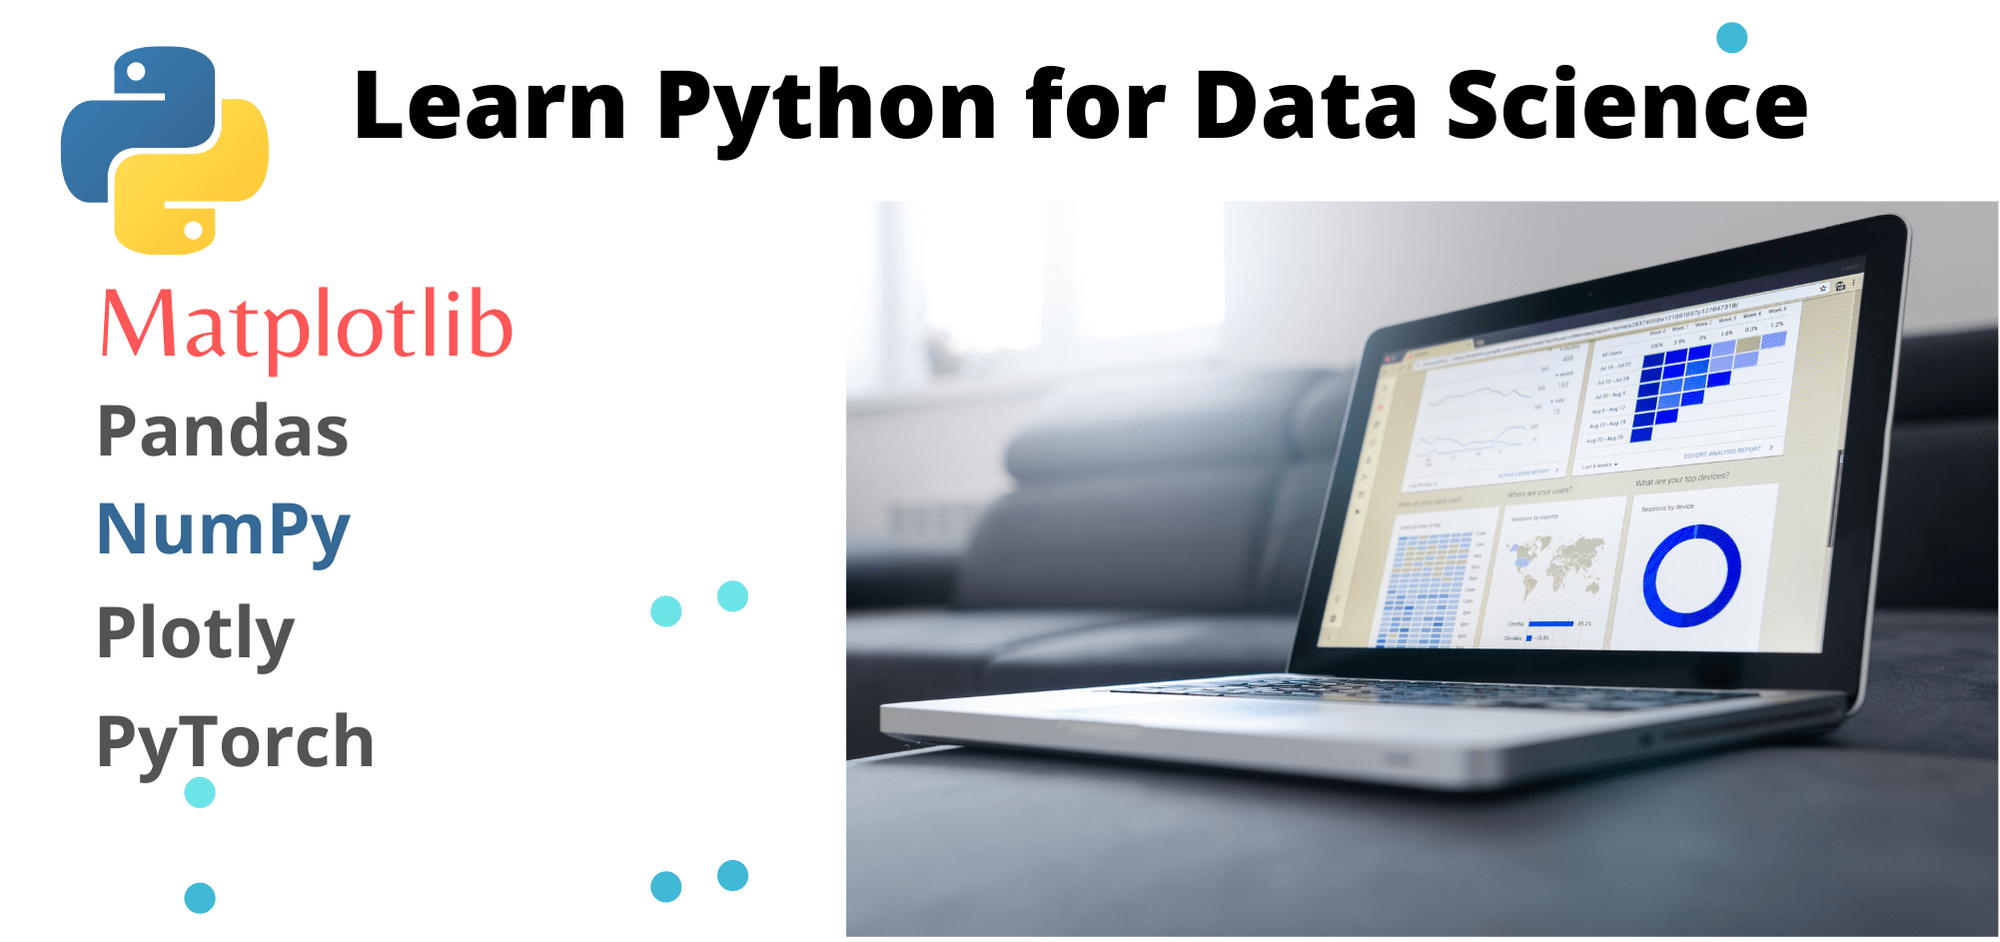 Learn Python to Get into Data Science Jobs